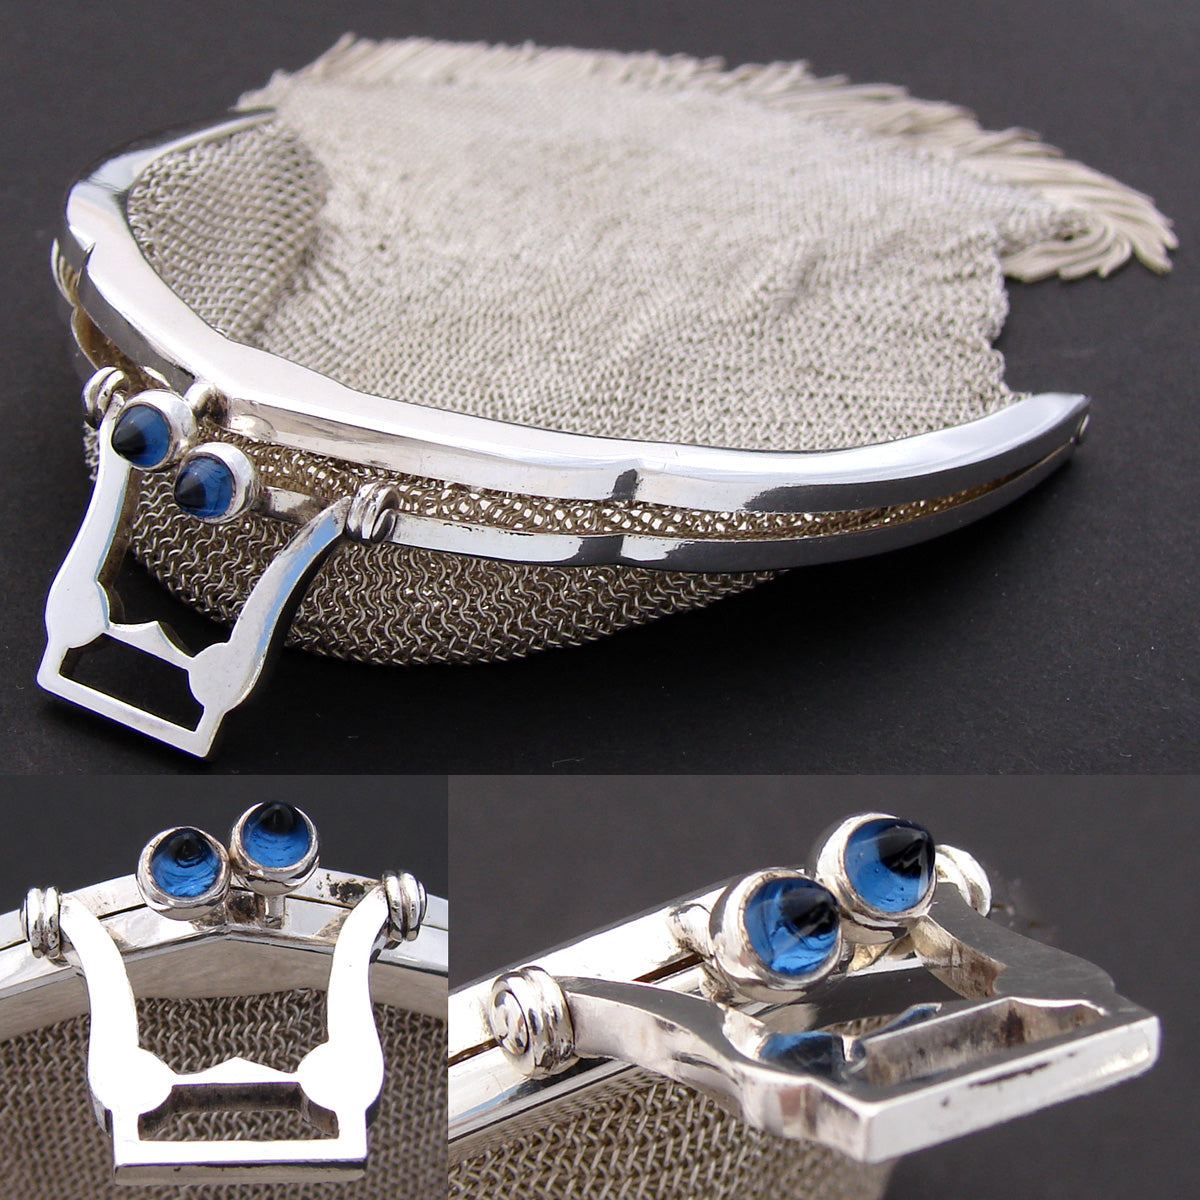 Gorgeous Antique .800 (nearly sterling) Silver 8.5" Mesh Purse, Hand Bag, Jeweled Clasp